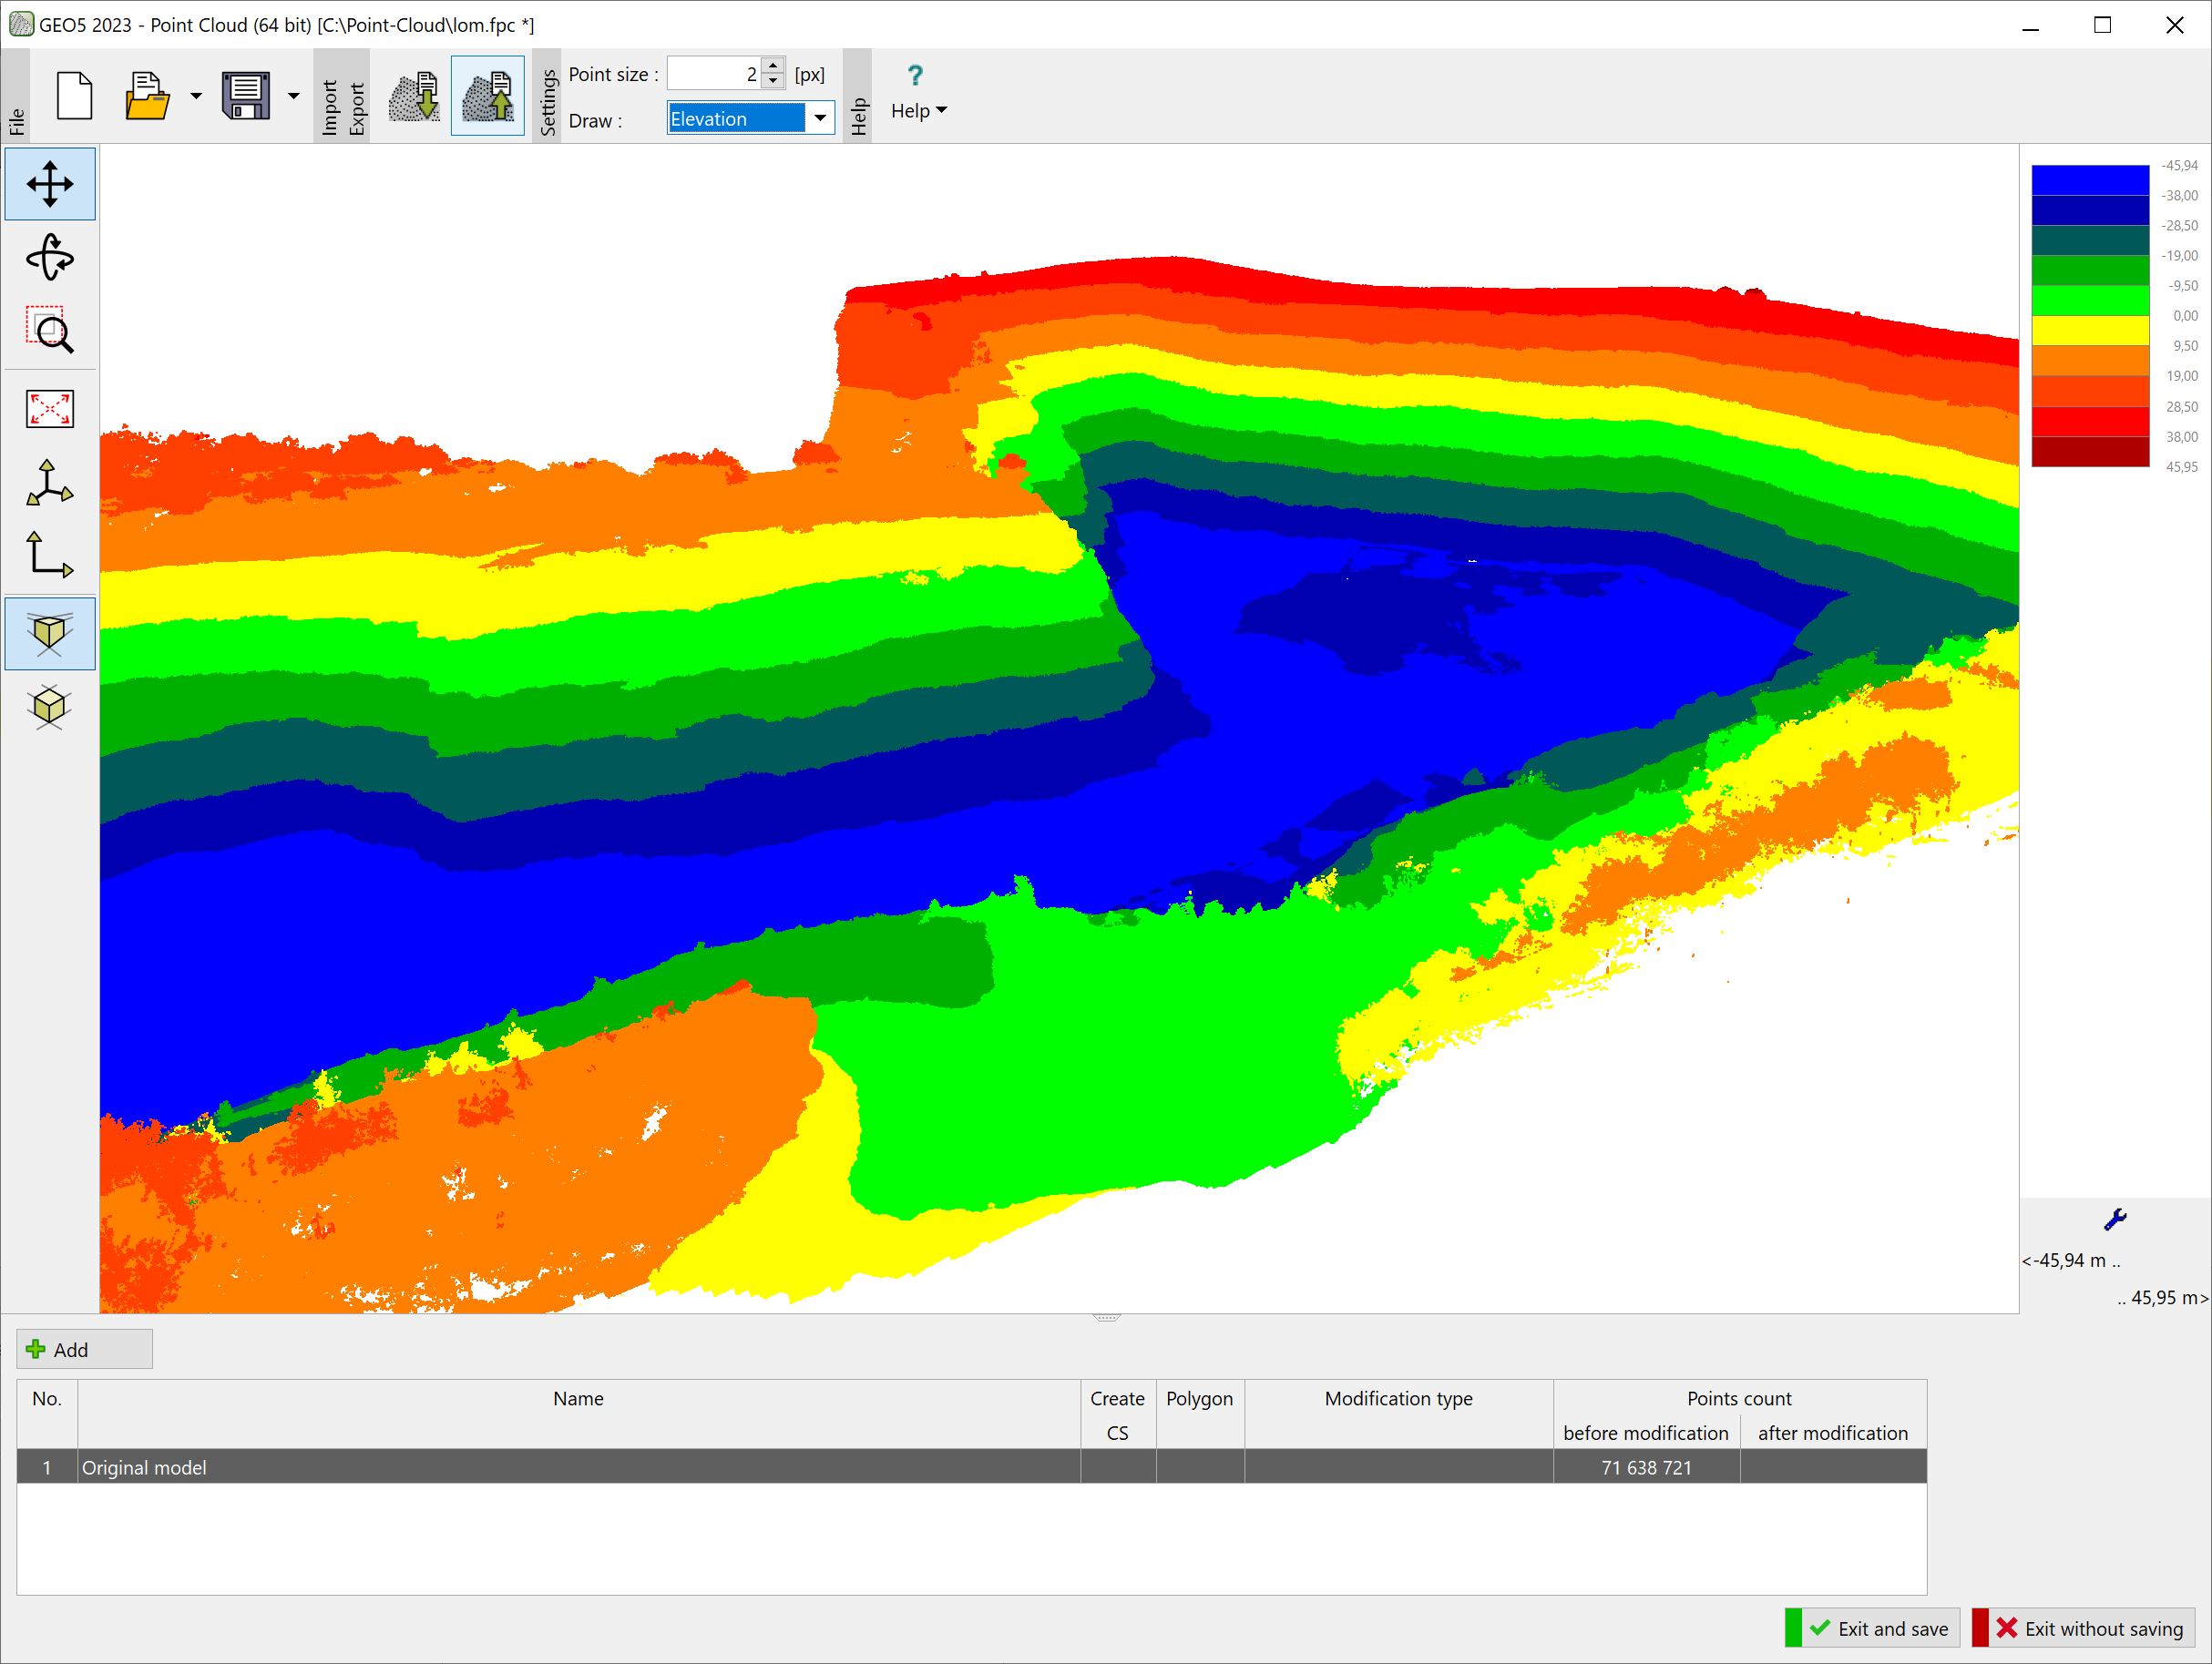 Point Cloud : Elevation map